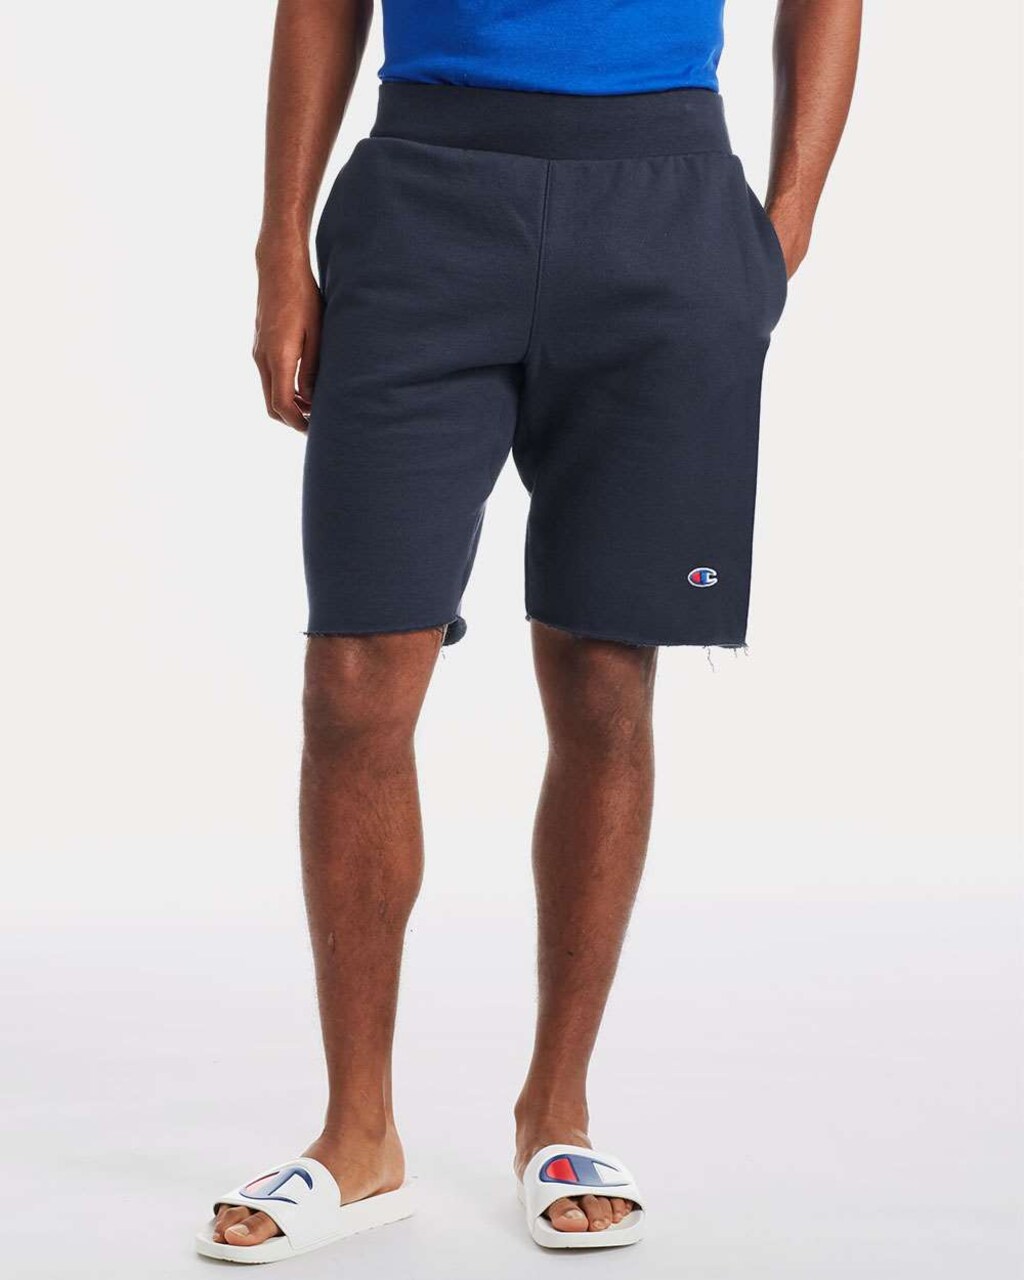 Man&#x27;s Shorts, Reverse Weave Fleece Shorts, Knee-Length Shorts For Men, C Logo, 10 | Stay Trendy and Comfortable with Reverse Weave Shorts &#x2013; Your New Favorites | RADYAN